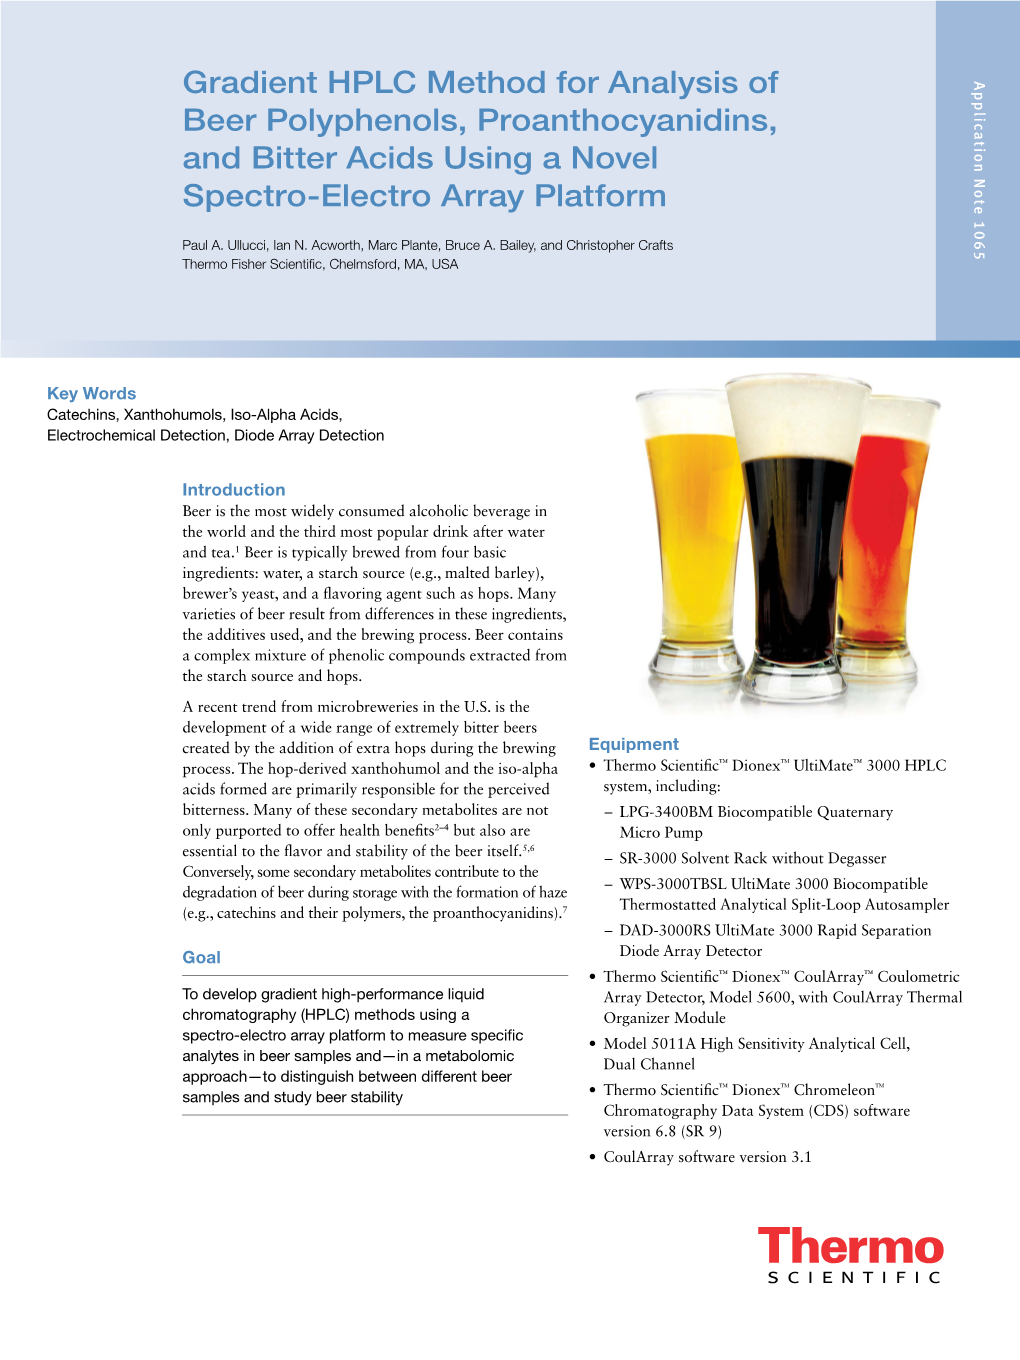 Gradient HPLC Method for Analysis of Beer Polyphenols